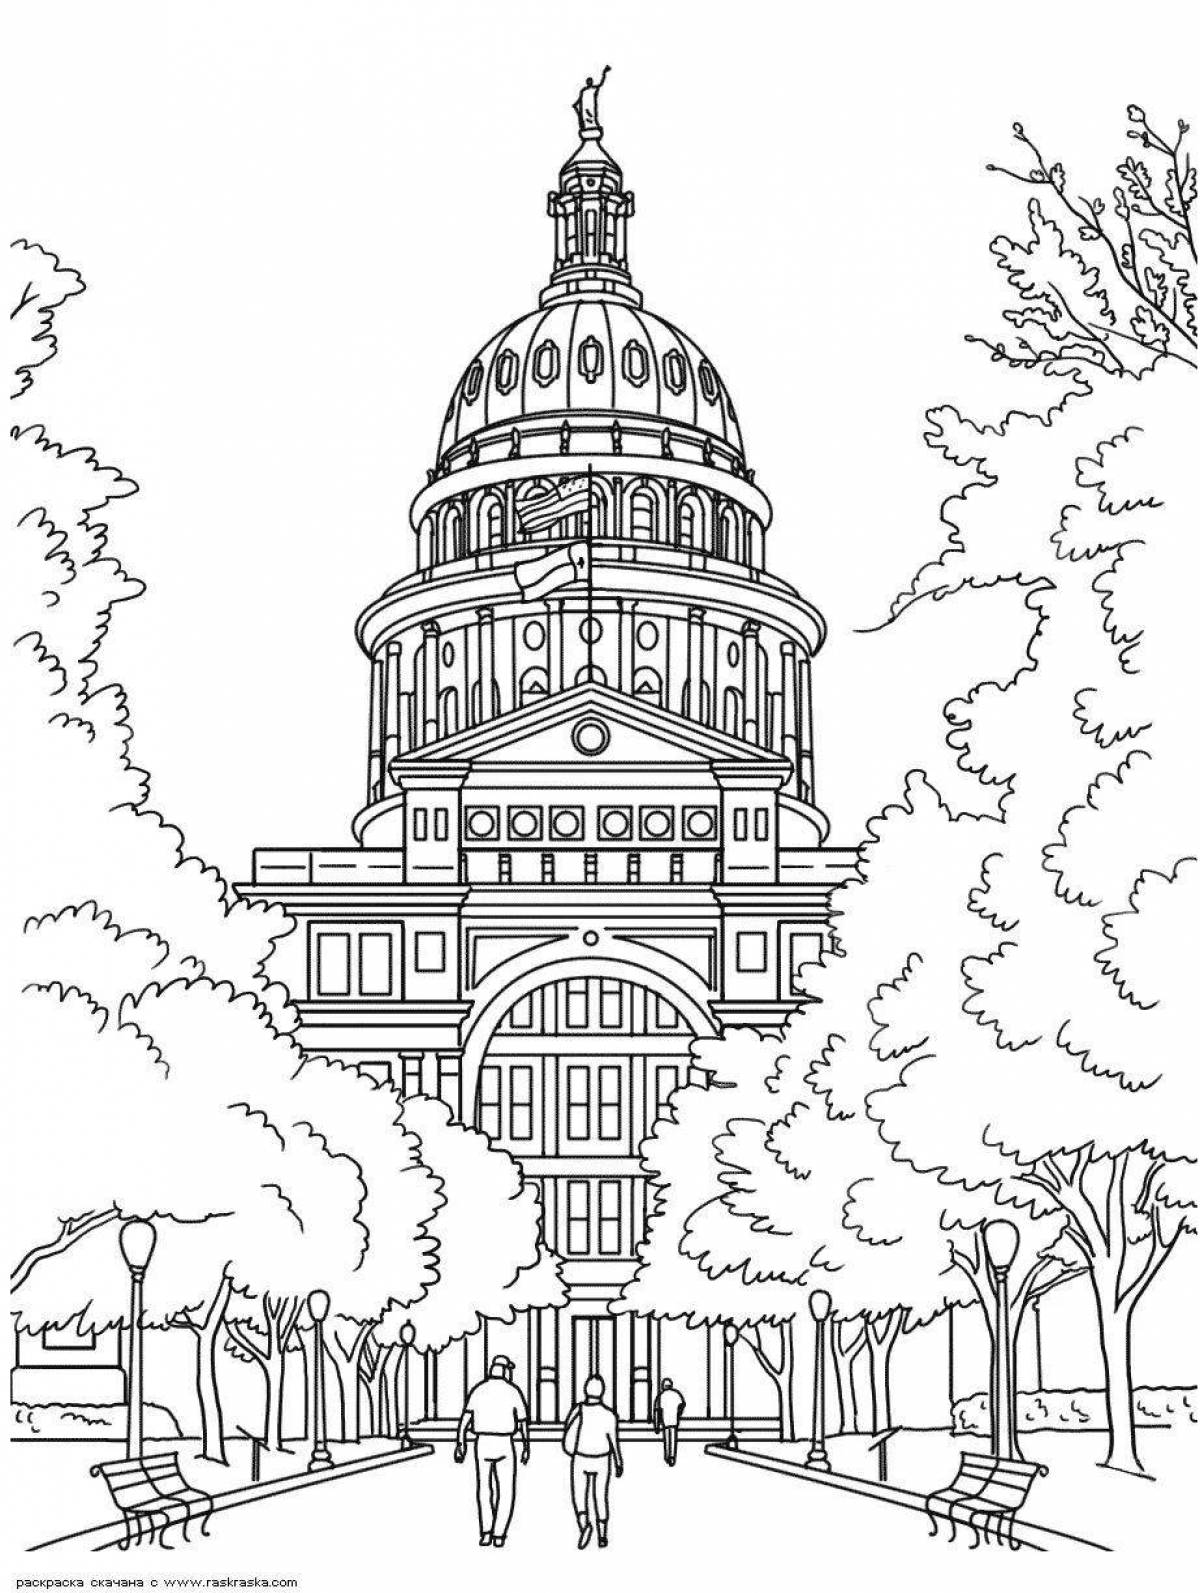 Amazing architecture coloring page